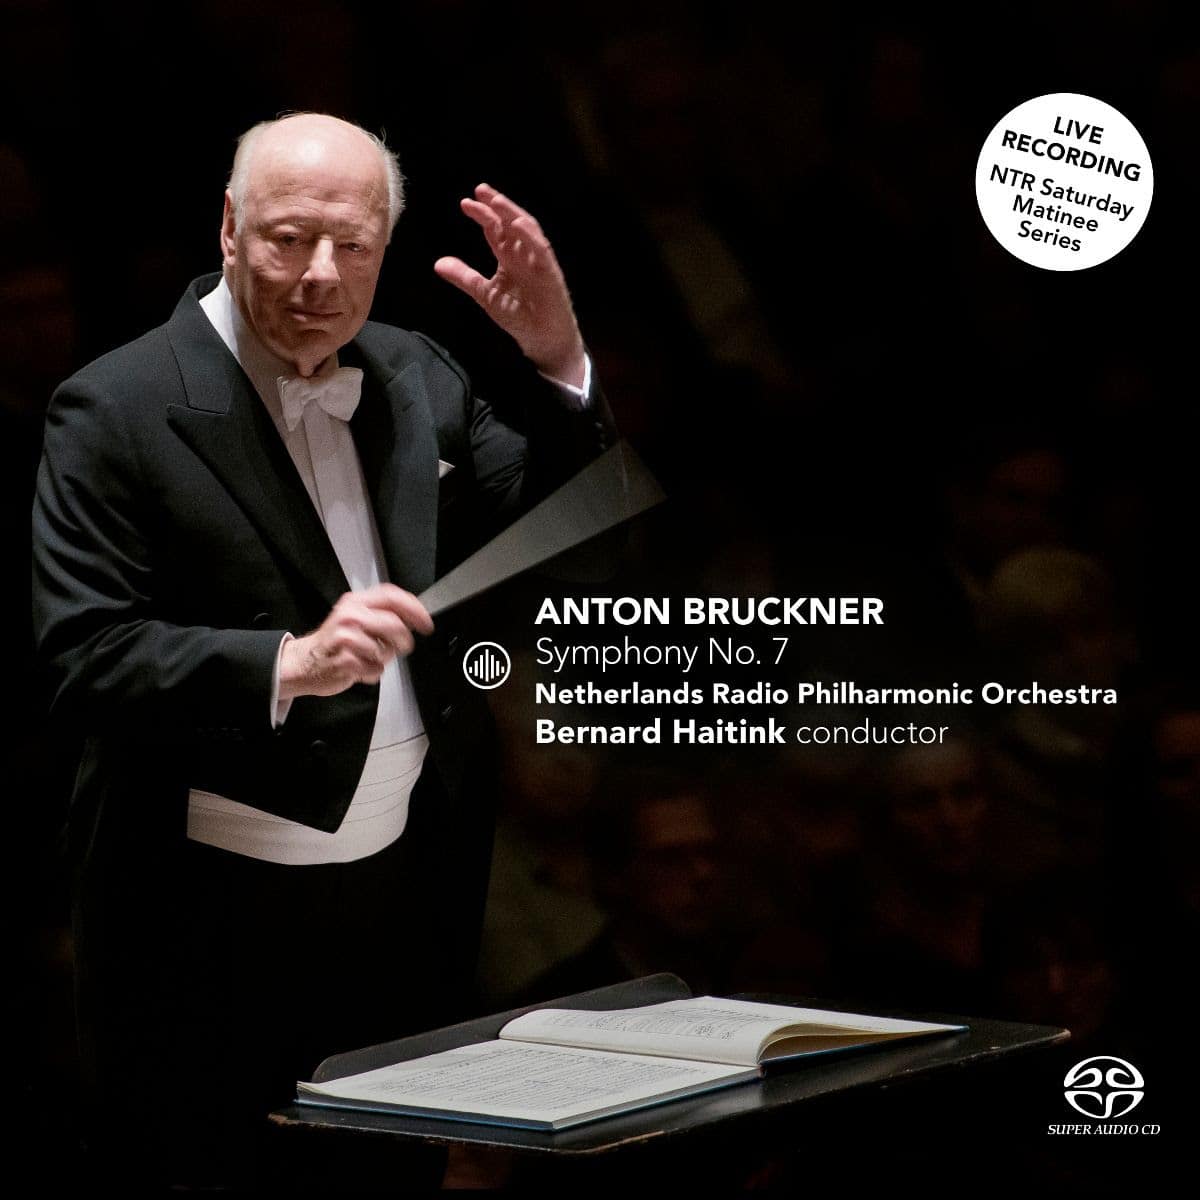 Bernard Haitink’s last concert is coming up for release